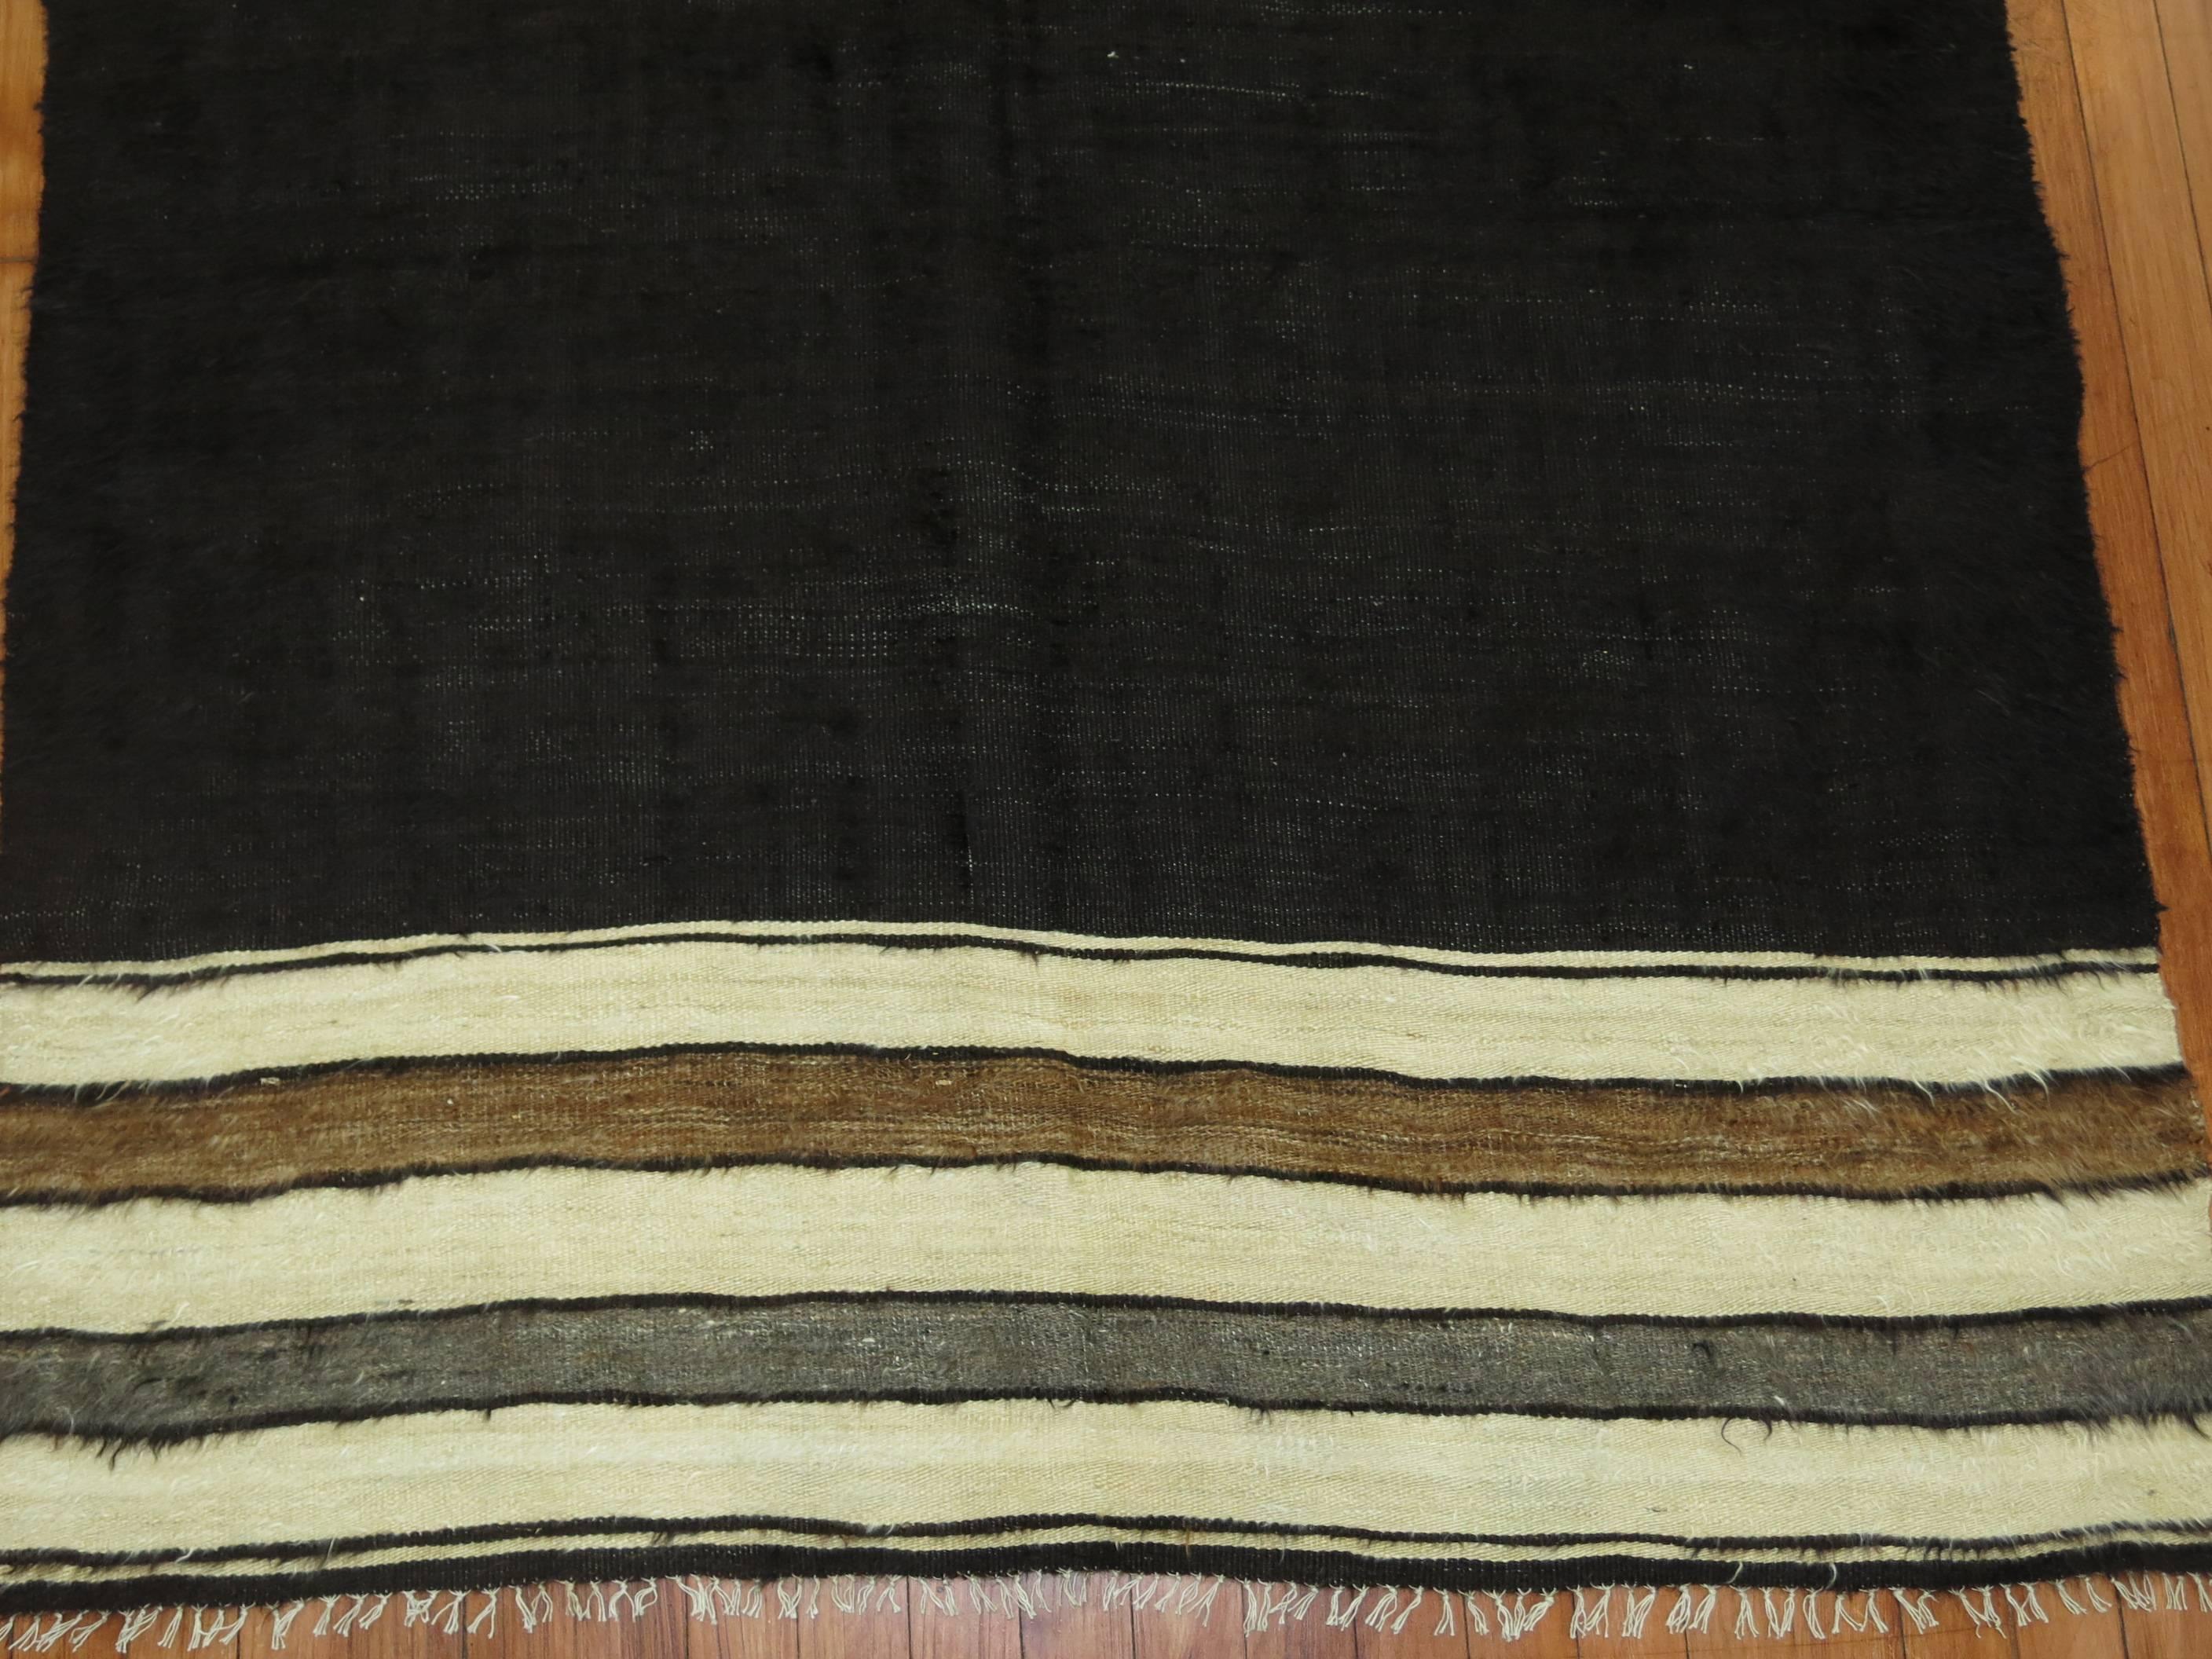 Mid-20th century Turkish Mohair rug, accents in black, ivory, brown, gray.

Measures: 4' x 5'3